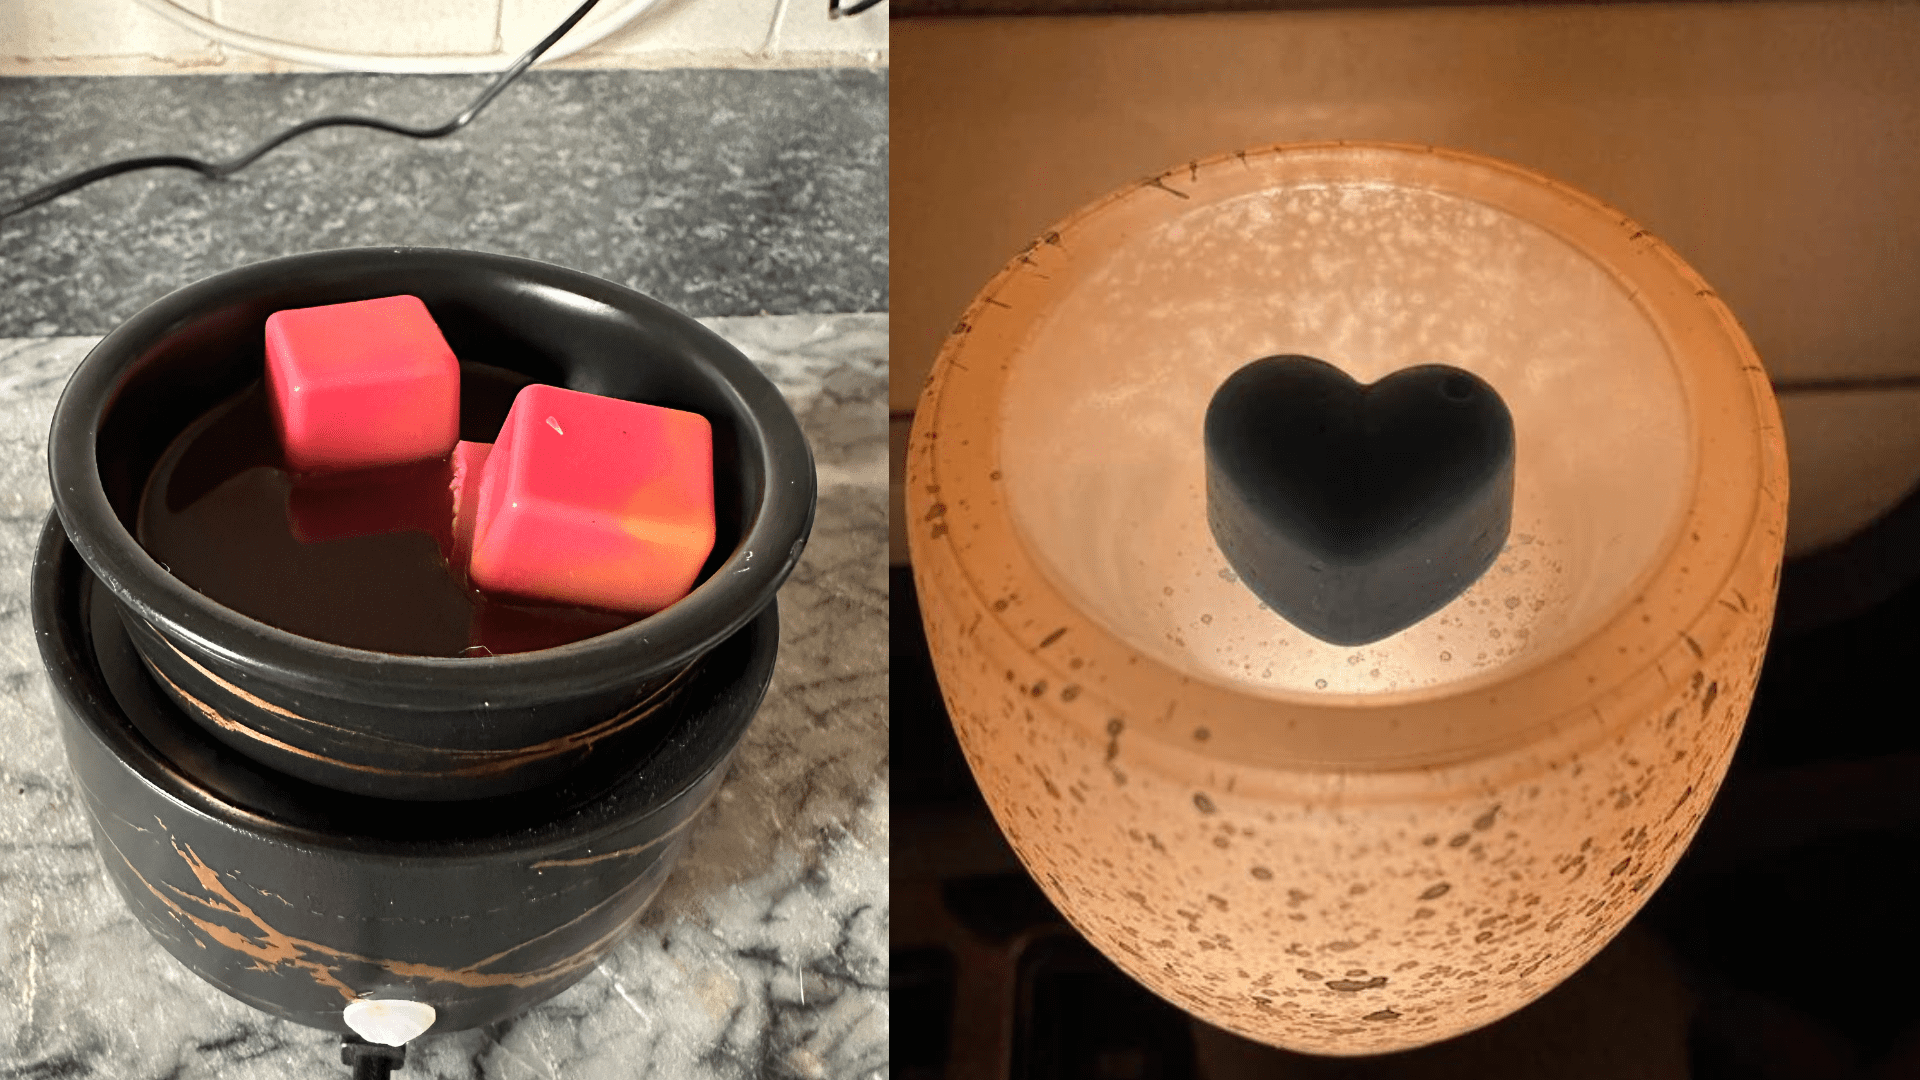 Can You Reuse Wax Melts?